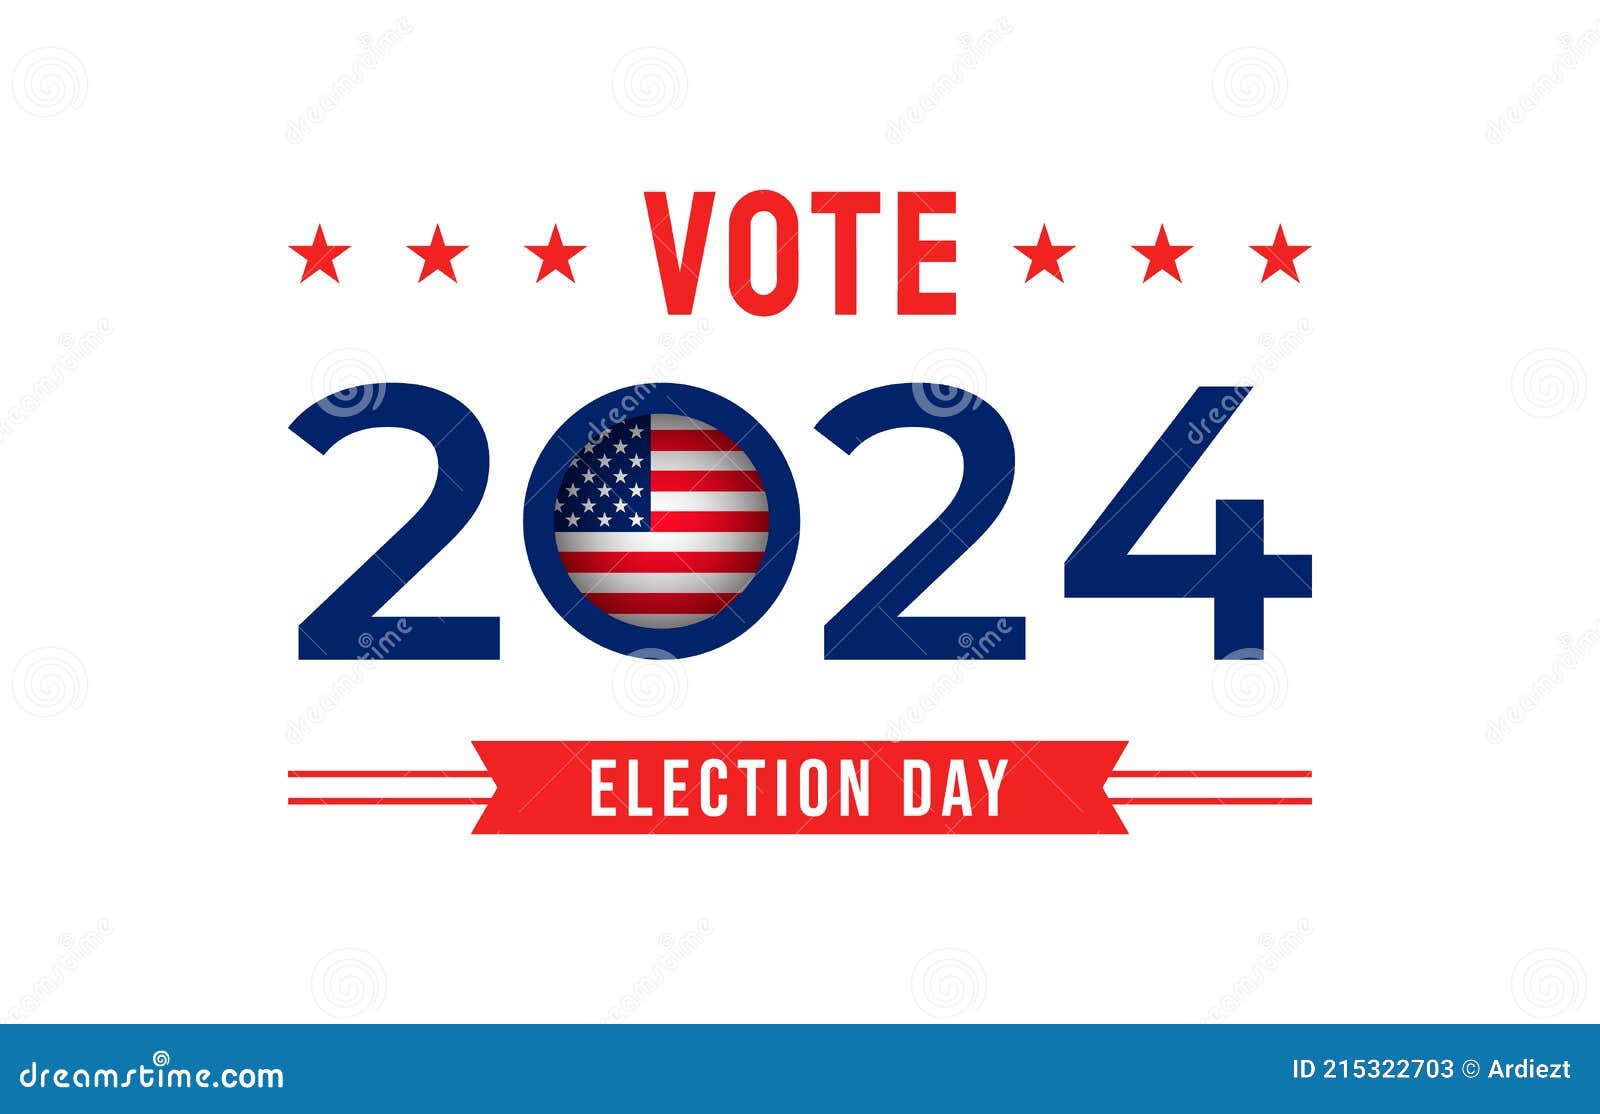 2024 United States of America Presidential Election Vote Banner Stock